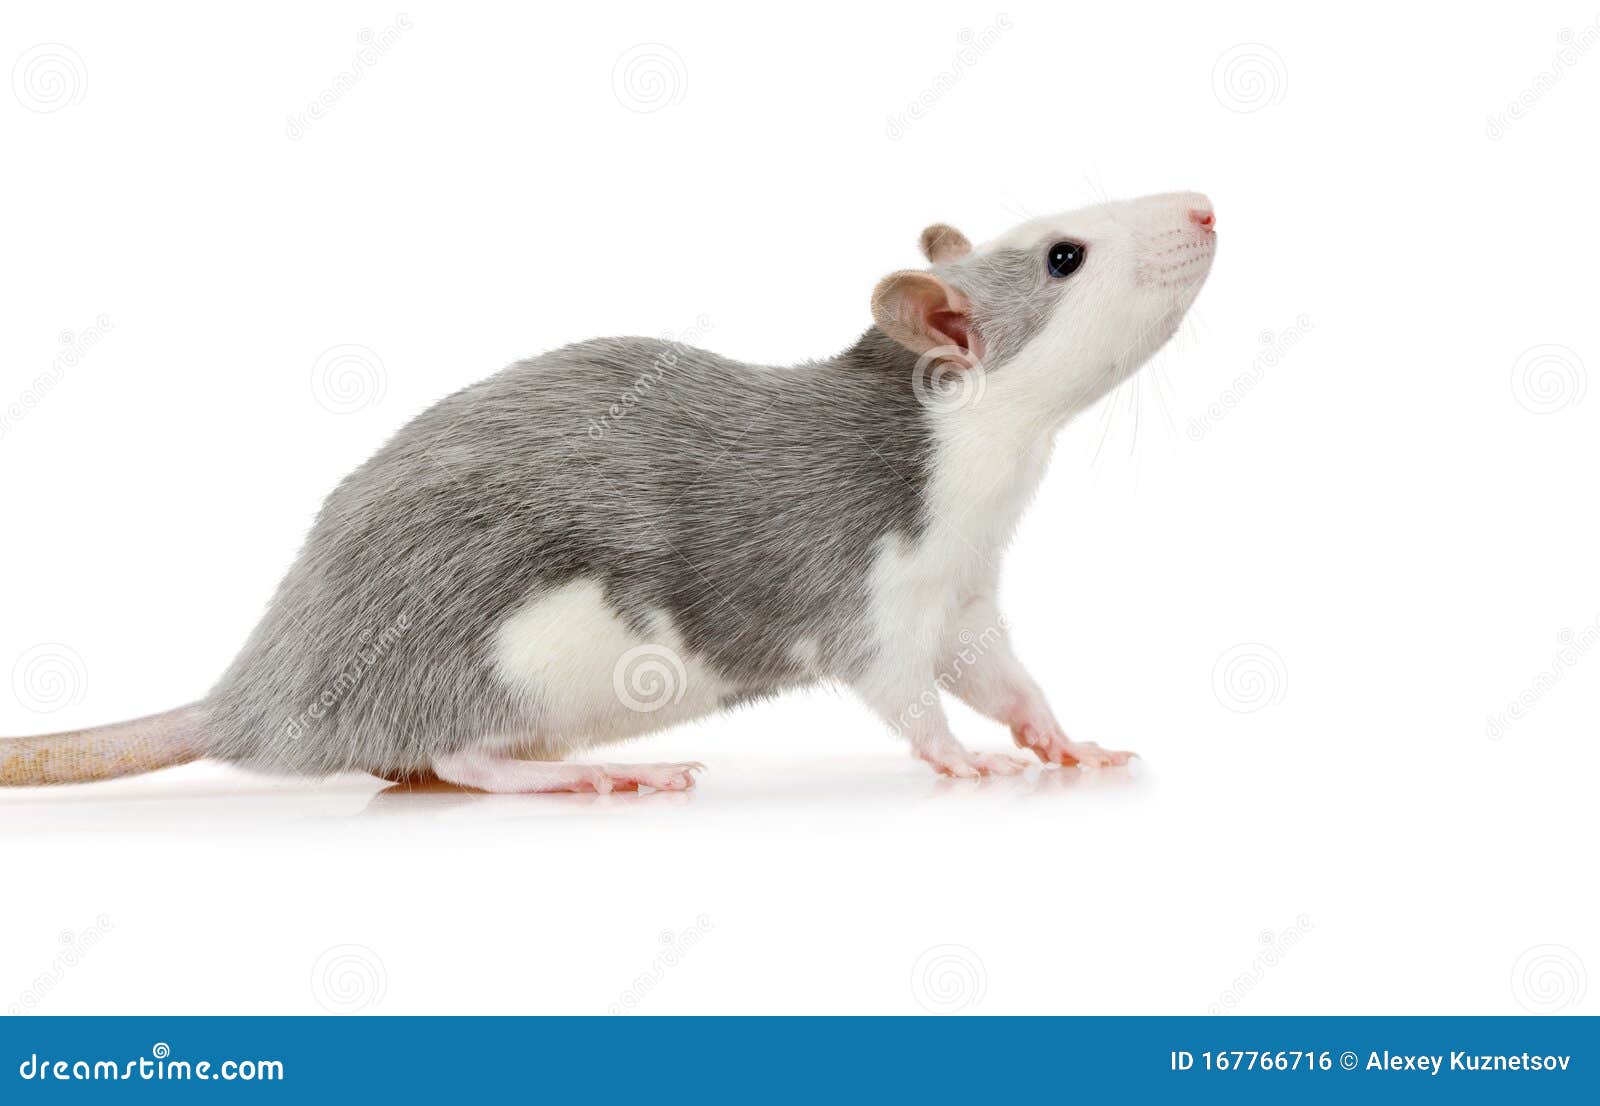 Little Cute Rat Sitting on a White Background Stock Photo - Image ...